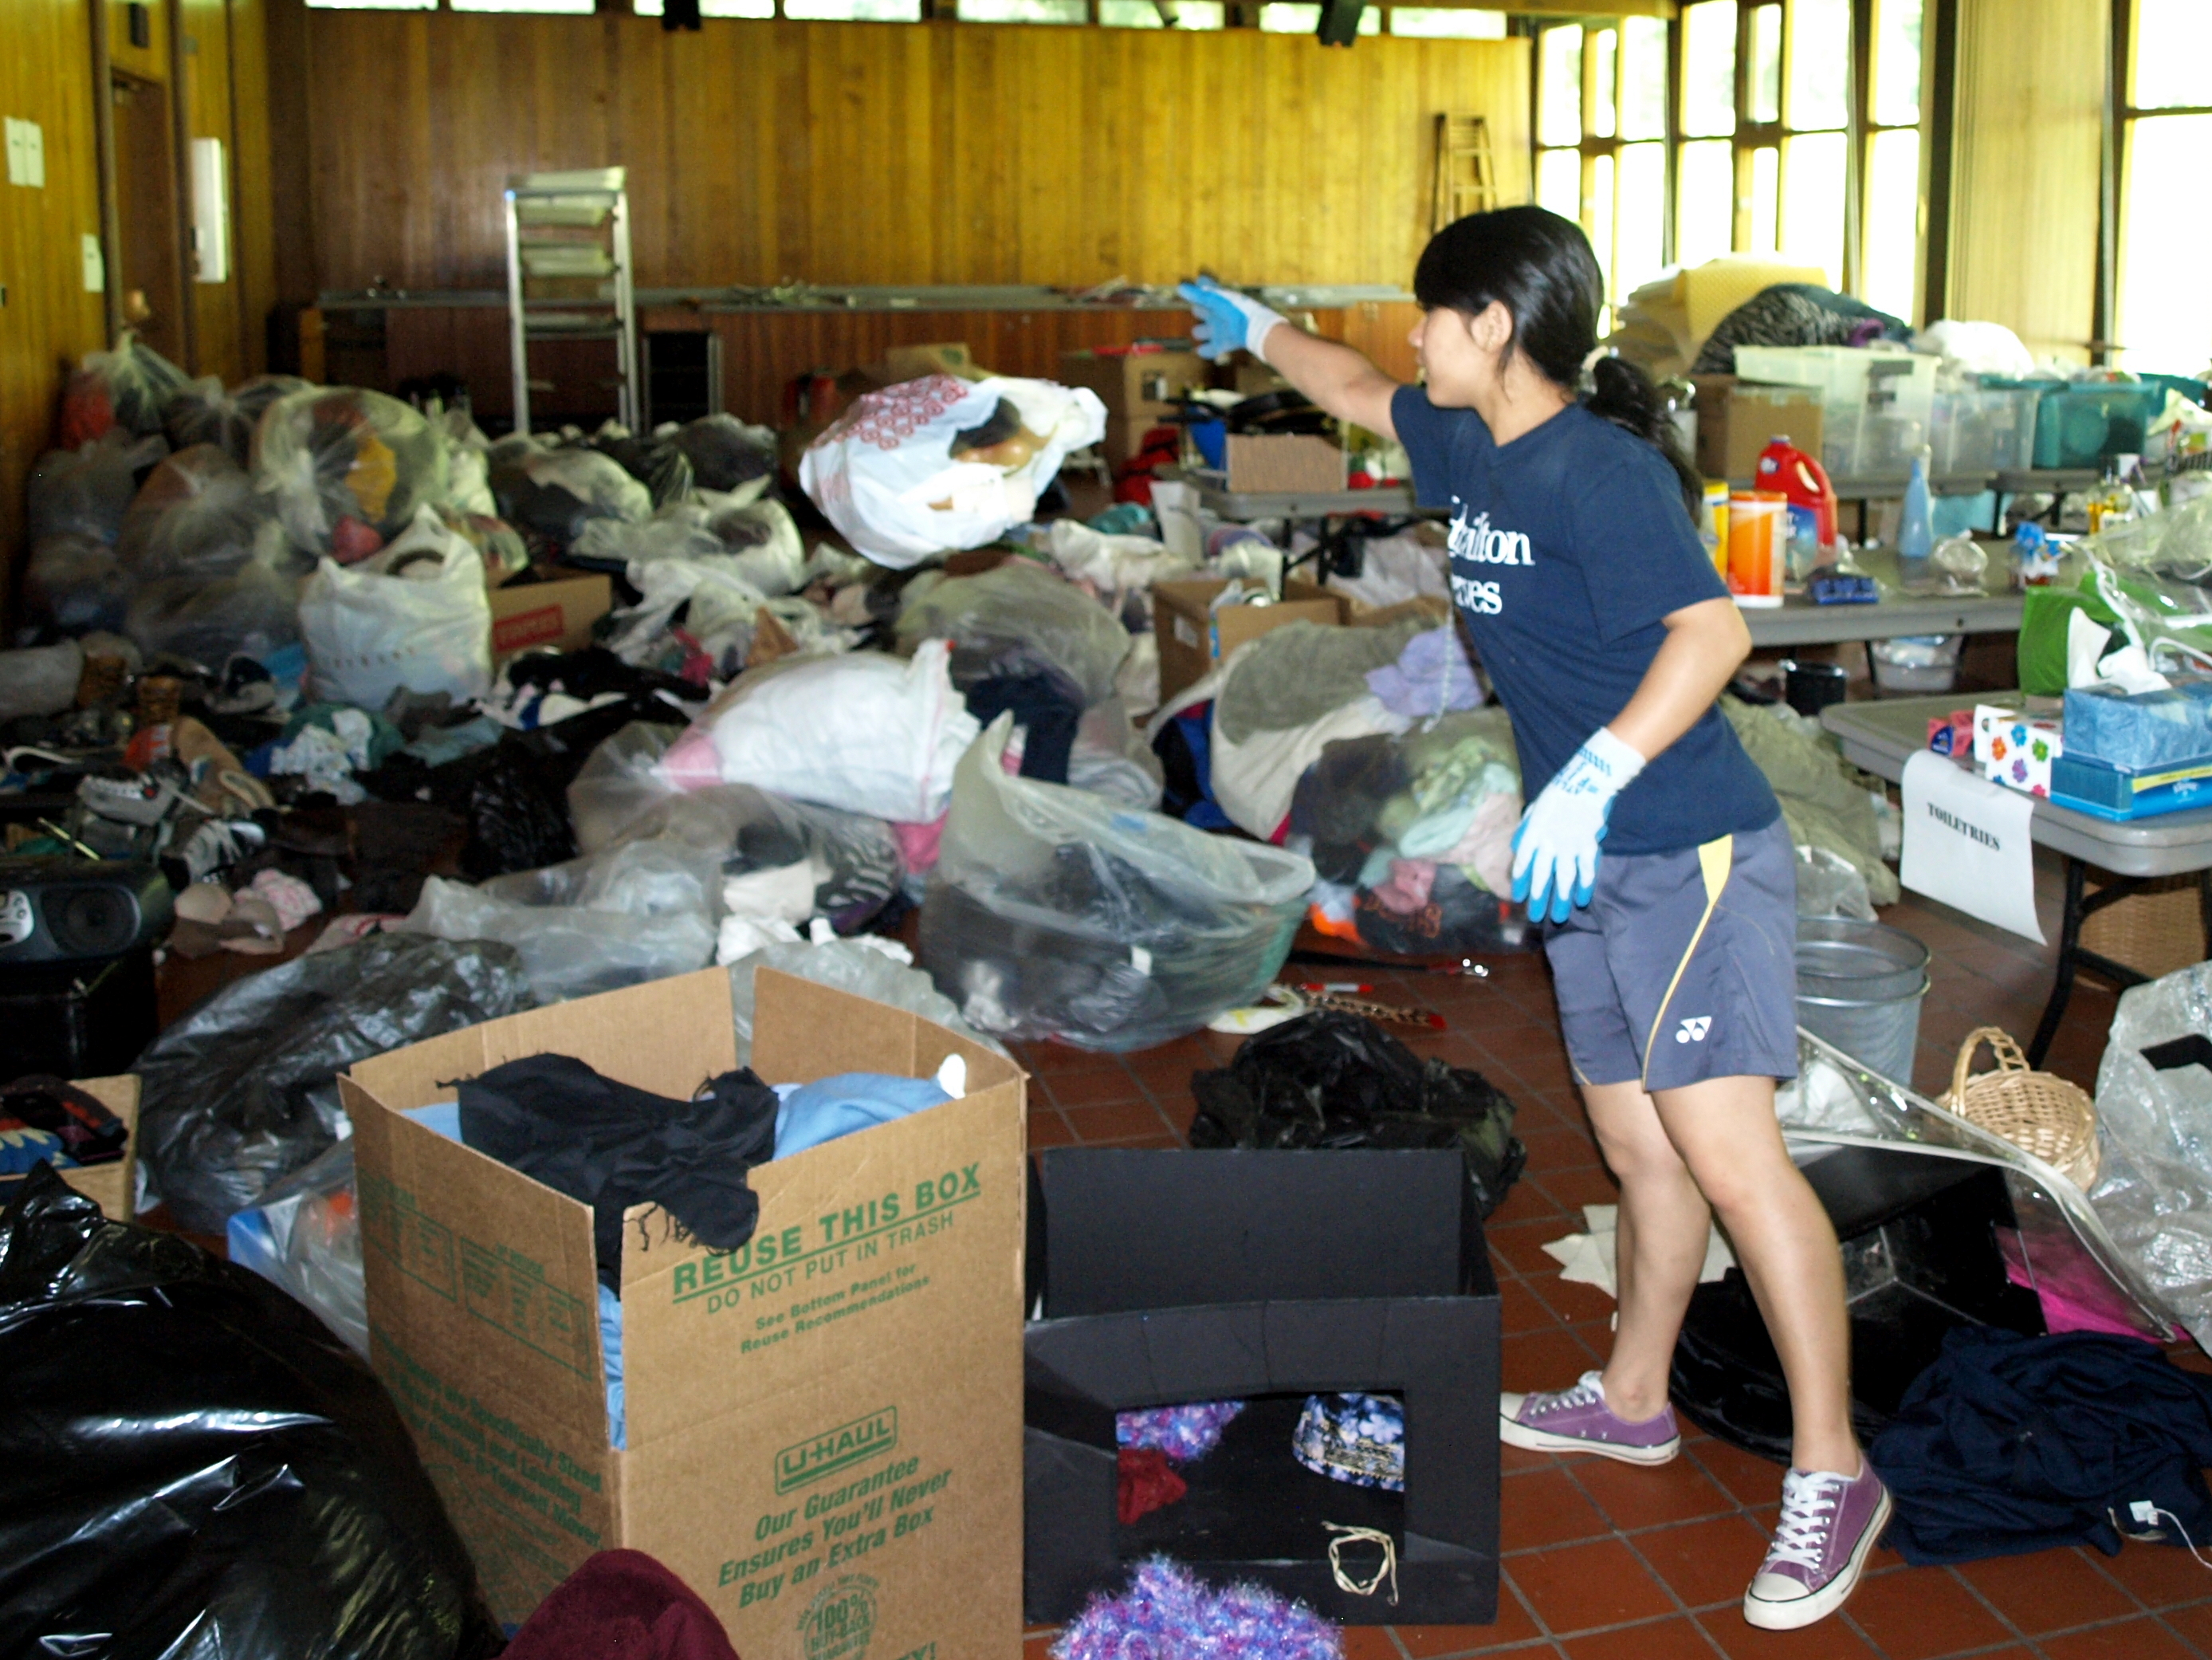 Akritee Shrestha '13 adds to the growing pile of clothing to be donated to the Salvation Army.